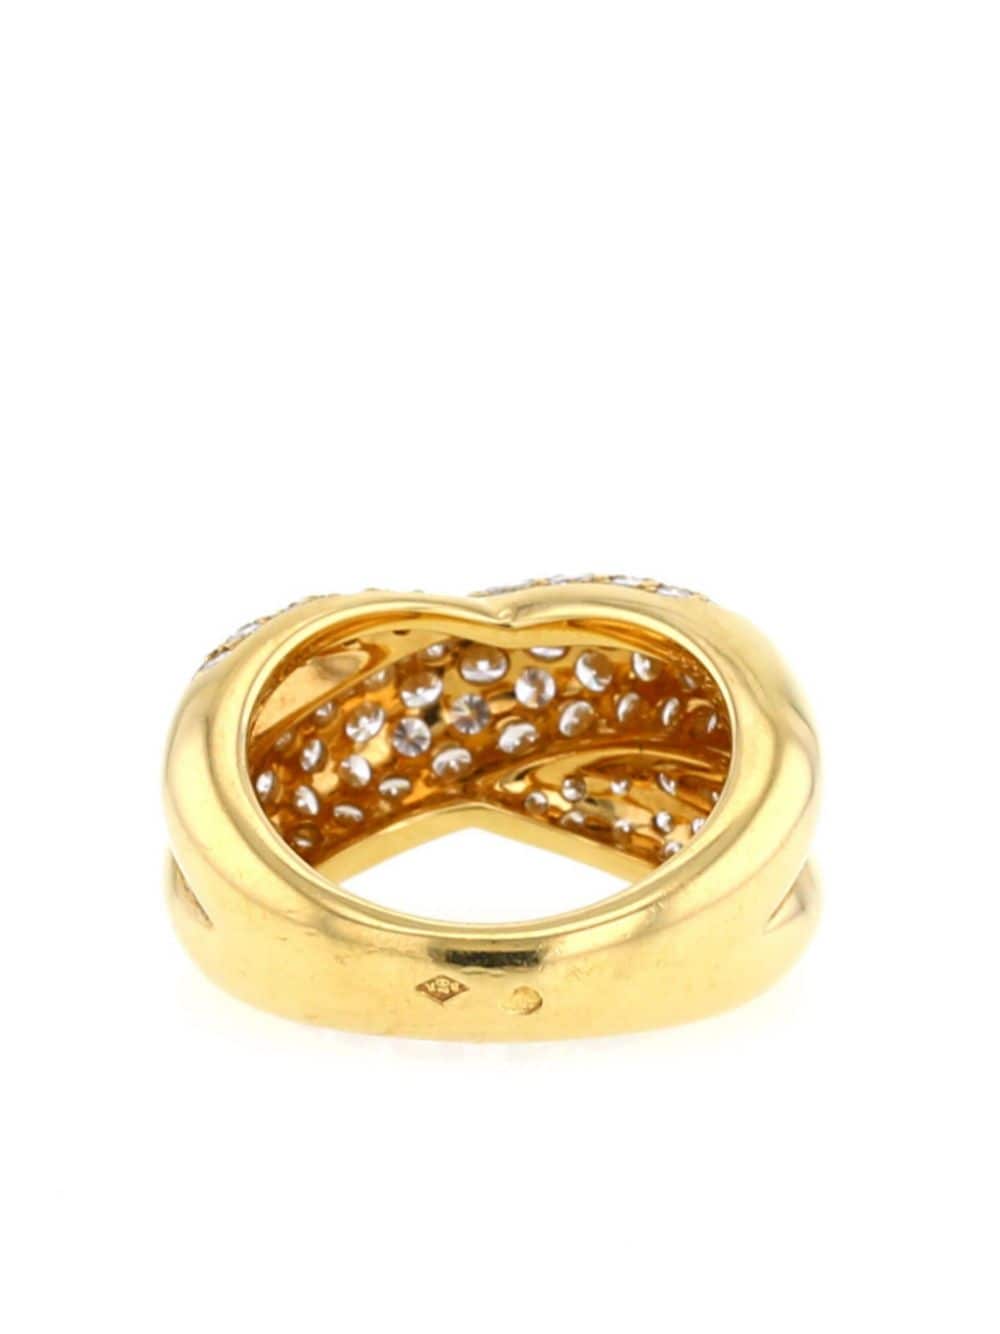 Pre-owned Cartier 1996 Yellow Gold Colisée Diamond Ring